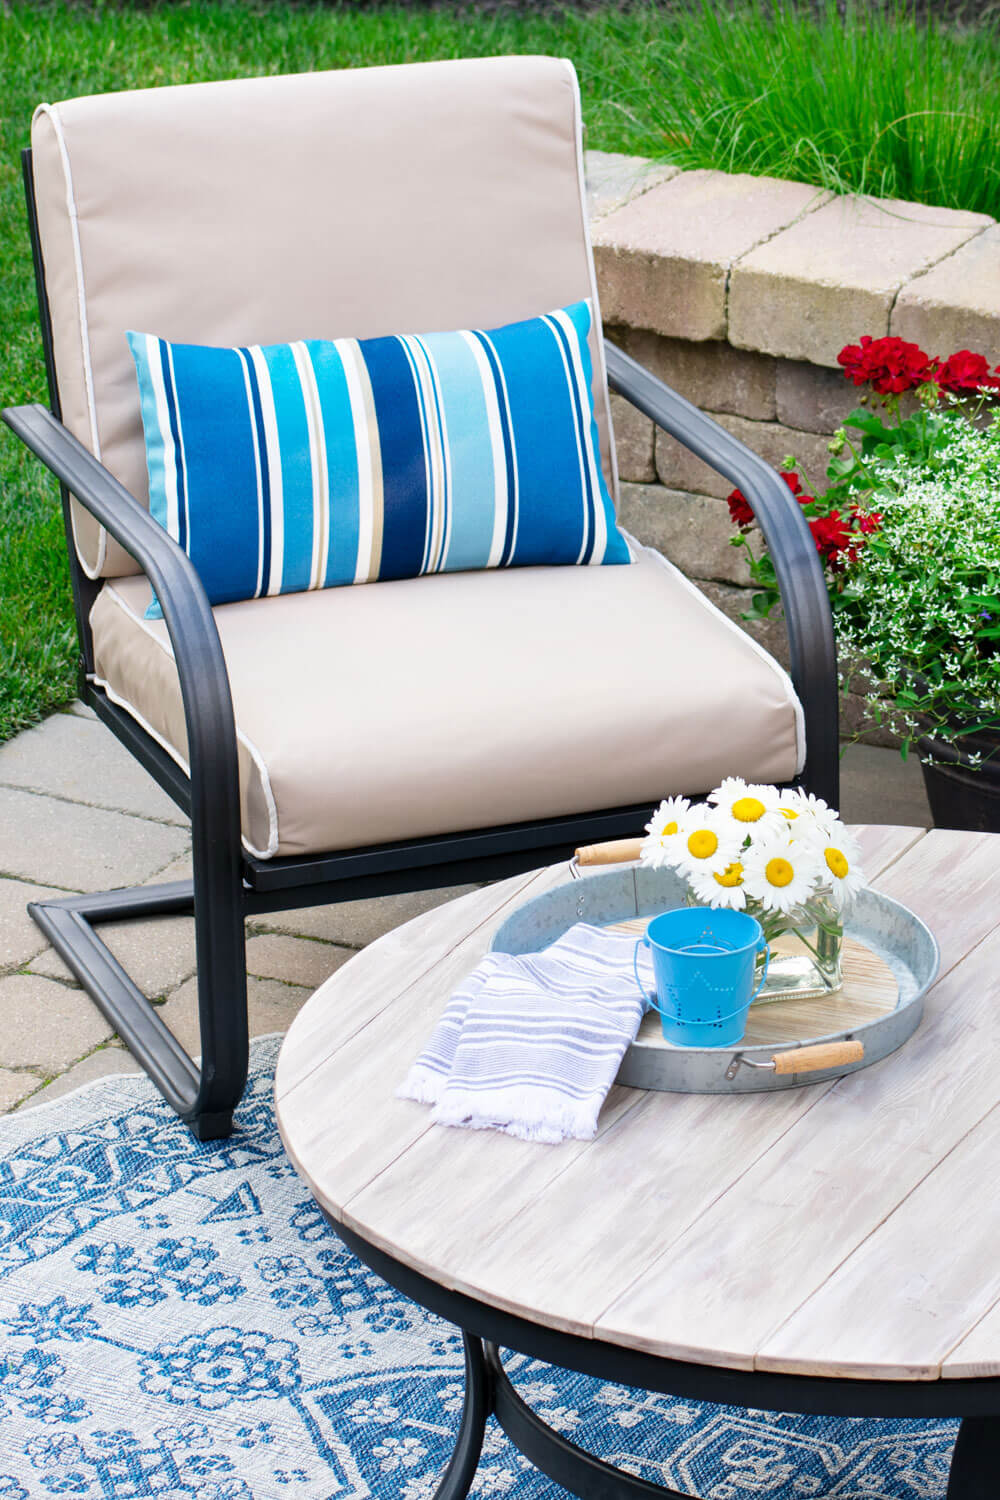 How To Recover Your Outdoor Patio Cushions With Durable Waterproof Fabric Complete Tutorial With Piping And Zipper Installation For Easy Cleaning 32